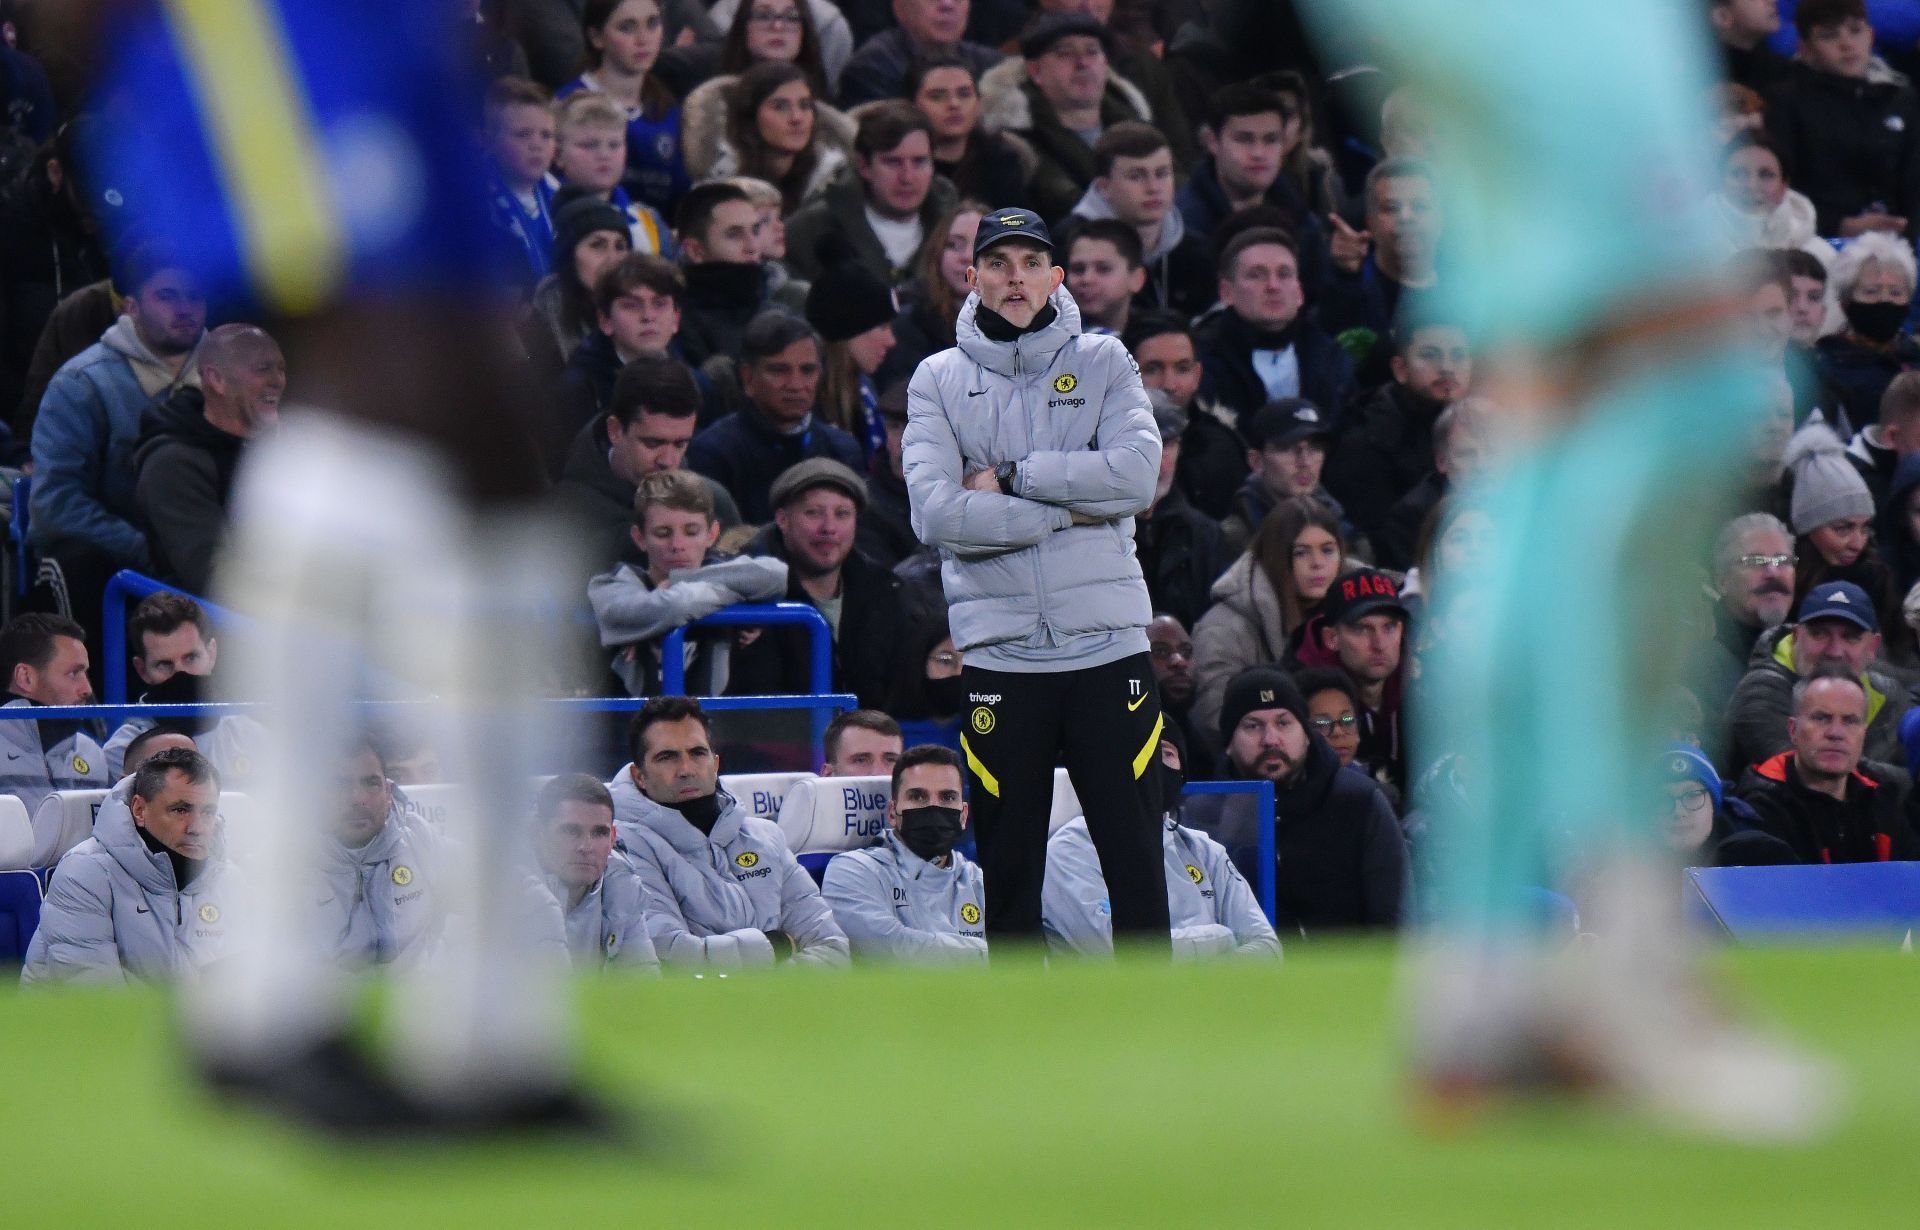 Chelsea manager Thomas Tuchel has his eyes on the FA Cup this season.